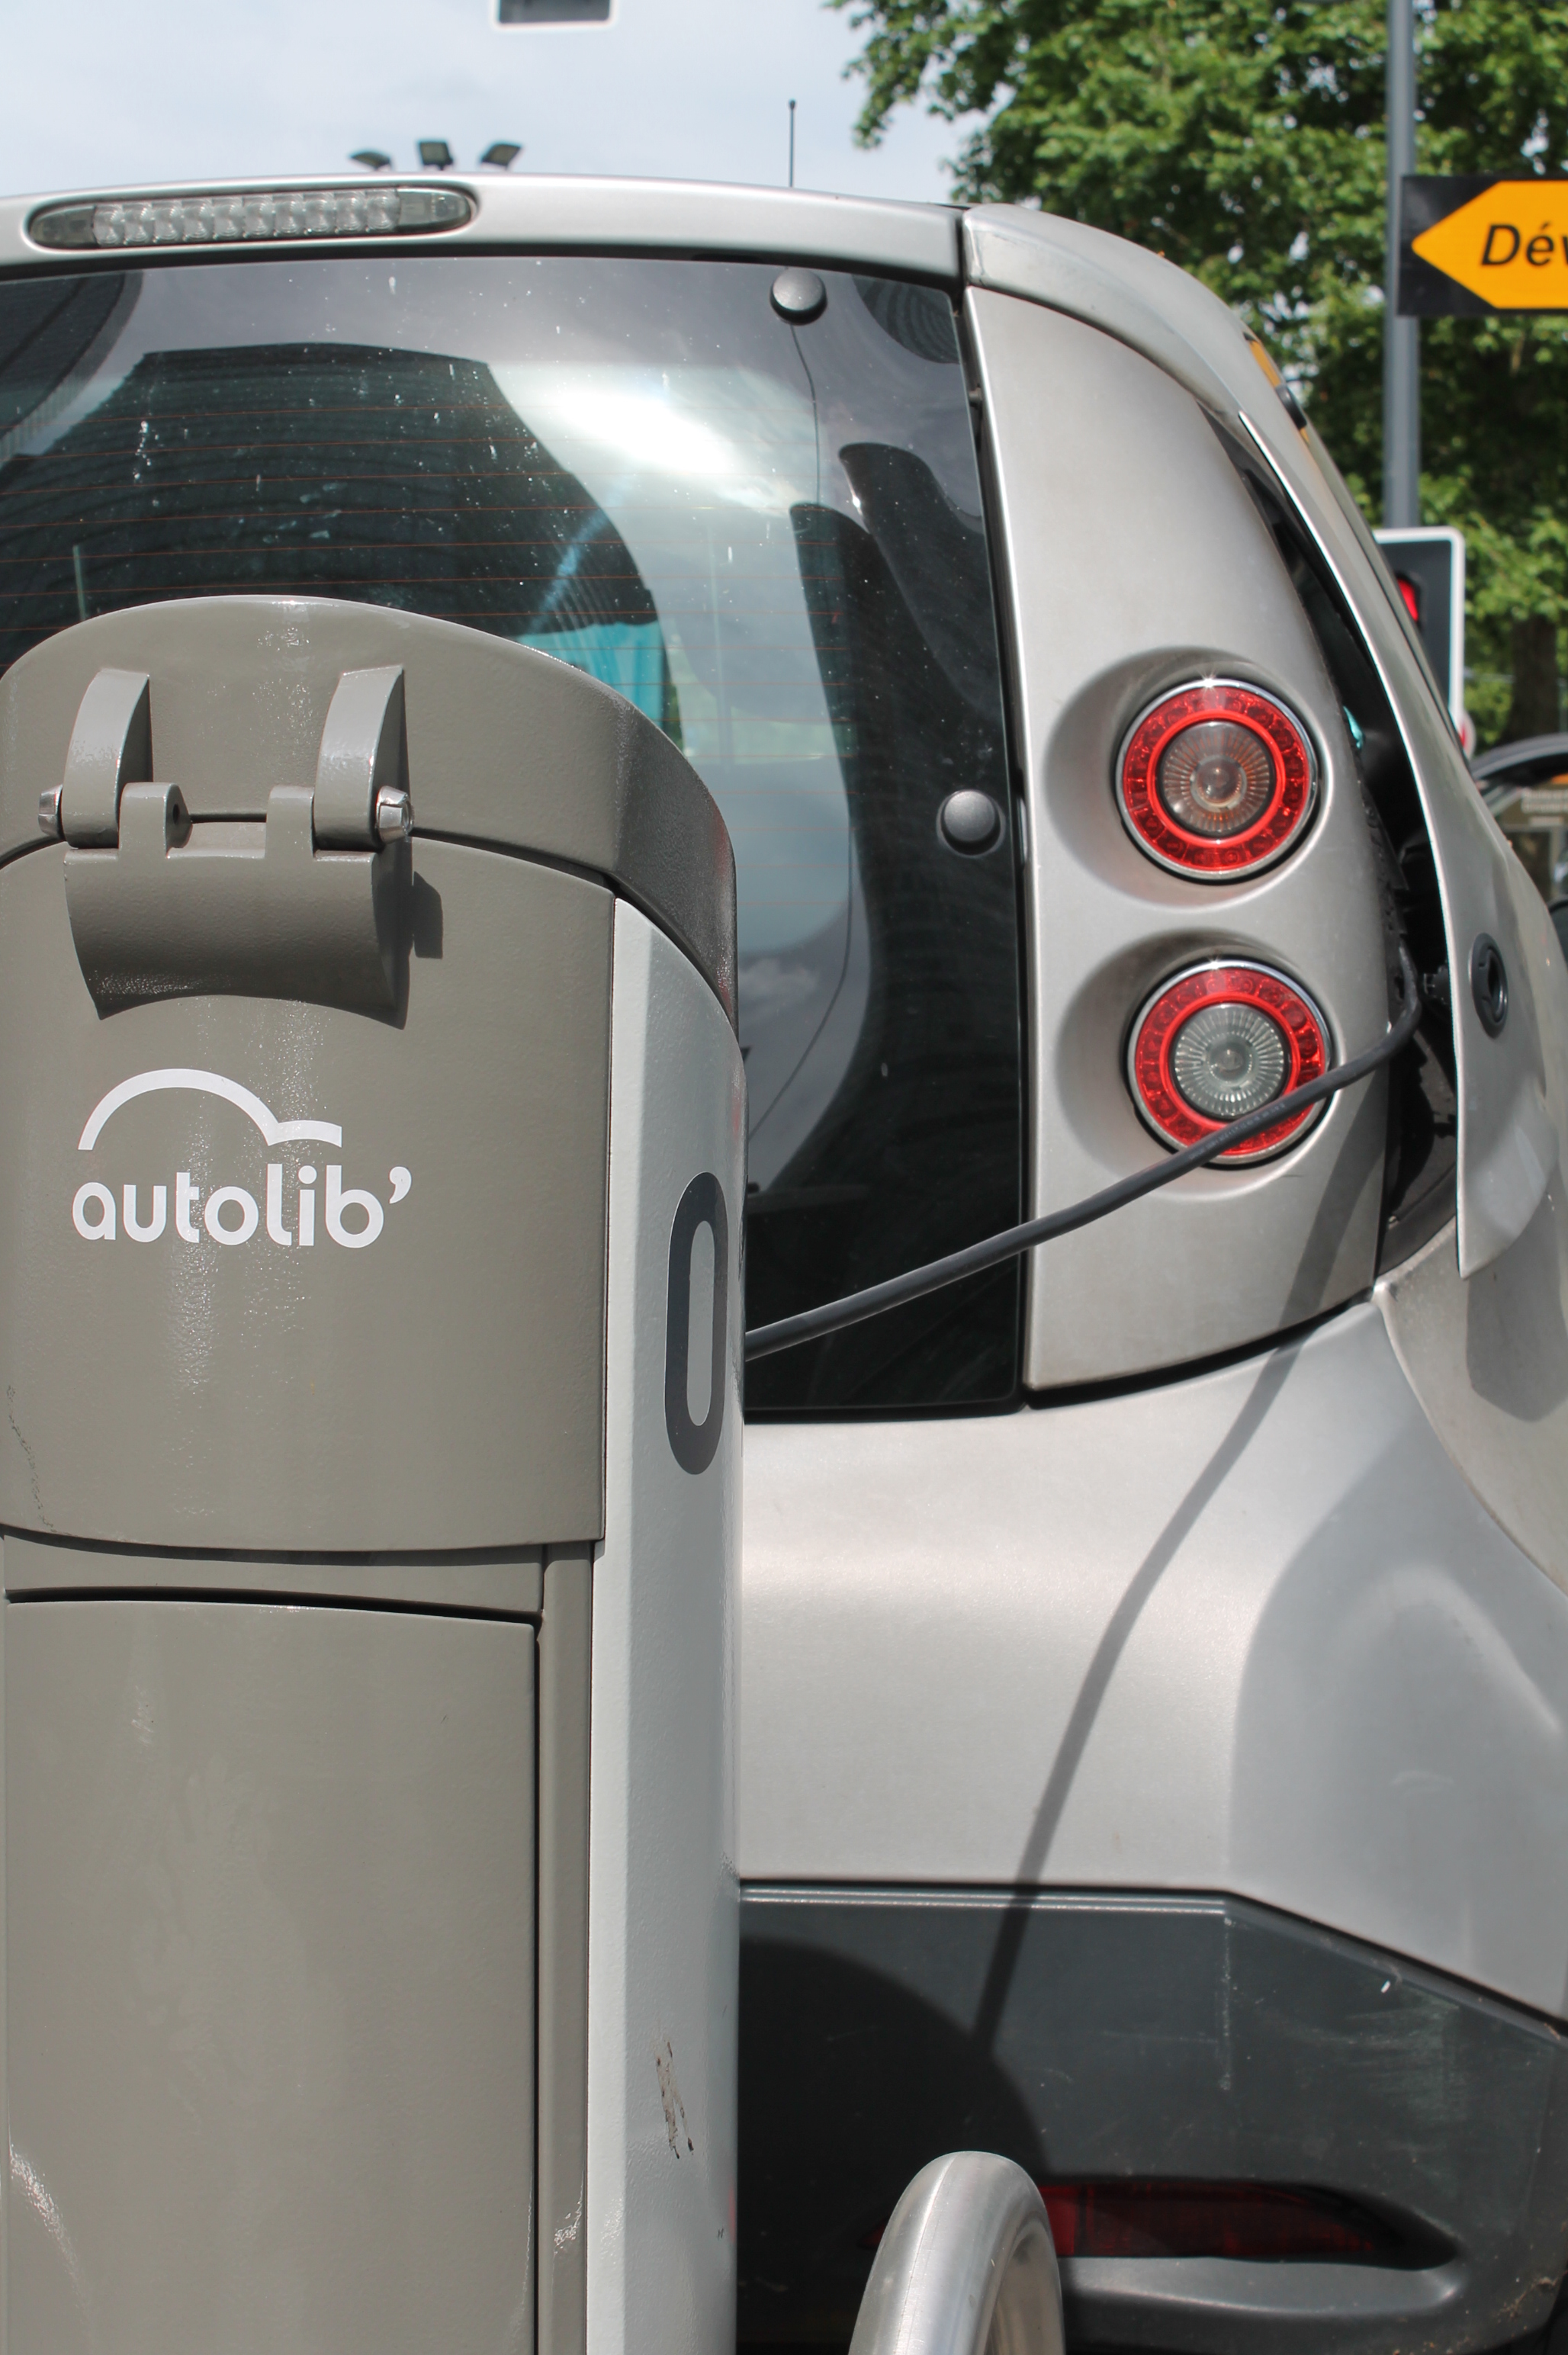 The Autolib’ service offers nearly 4,000 fully electric cars in Paris.